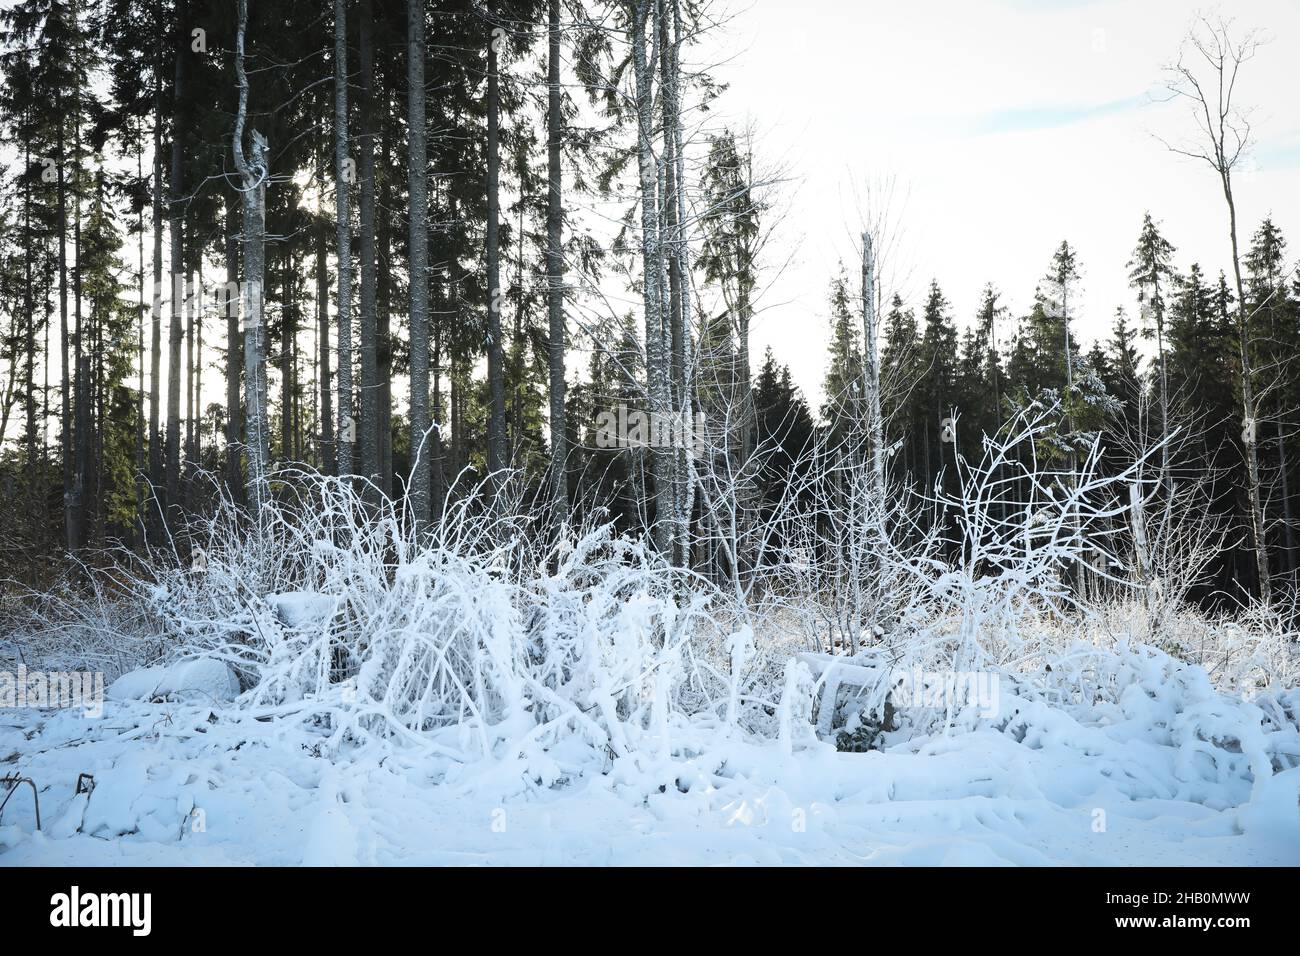 Mountain forest with snow in sunny winter day Stock Photo